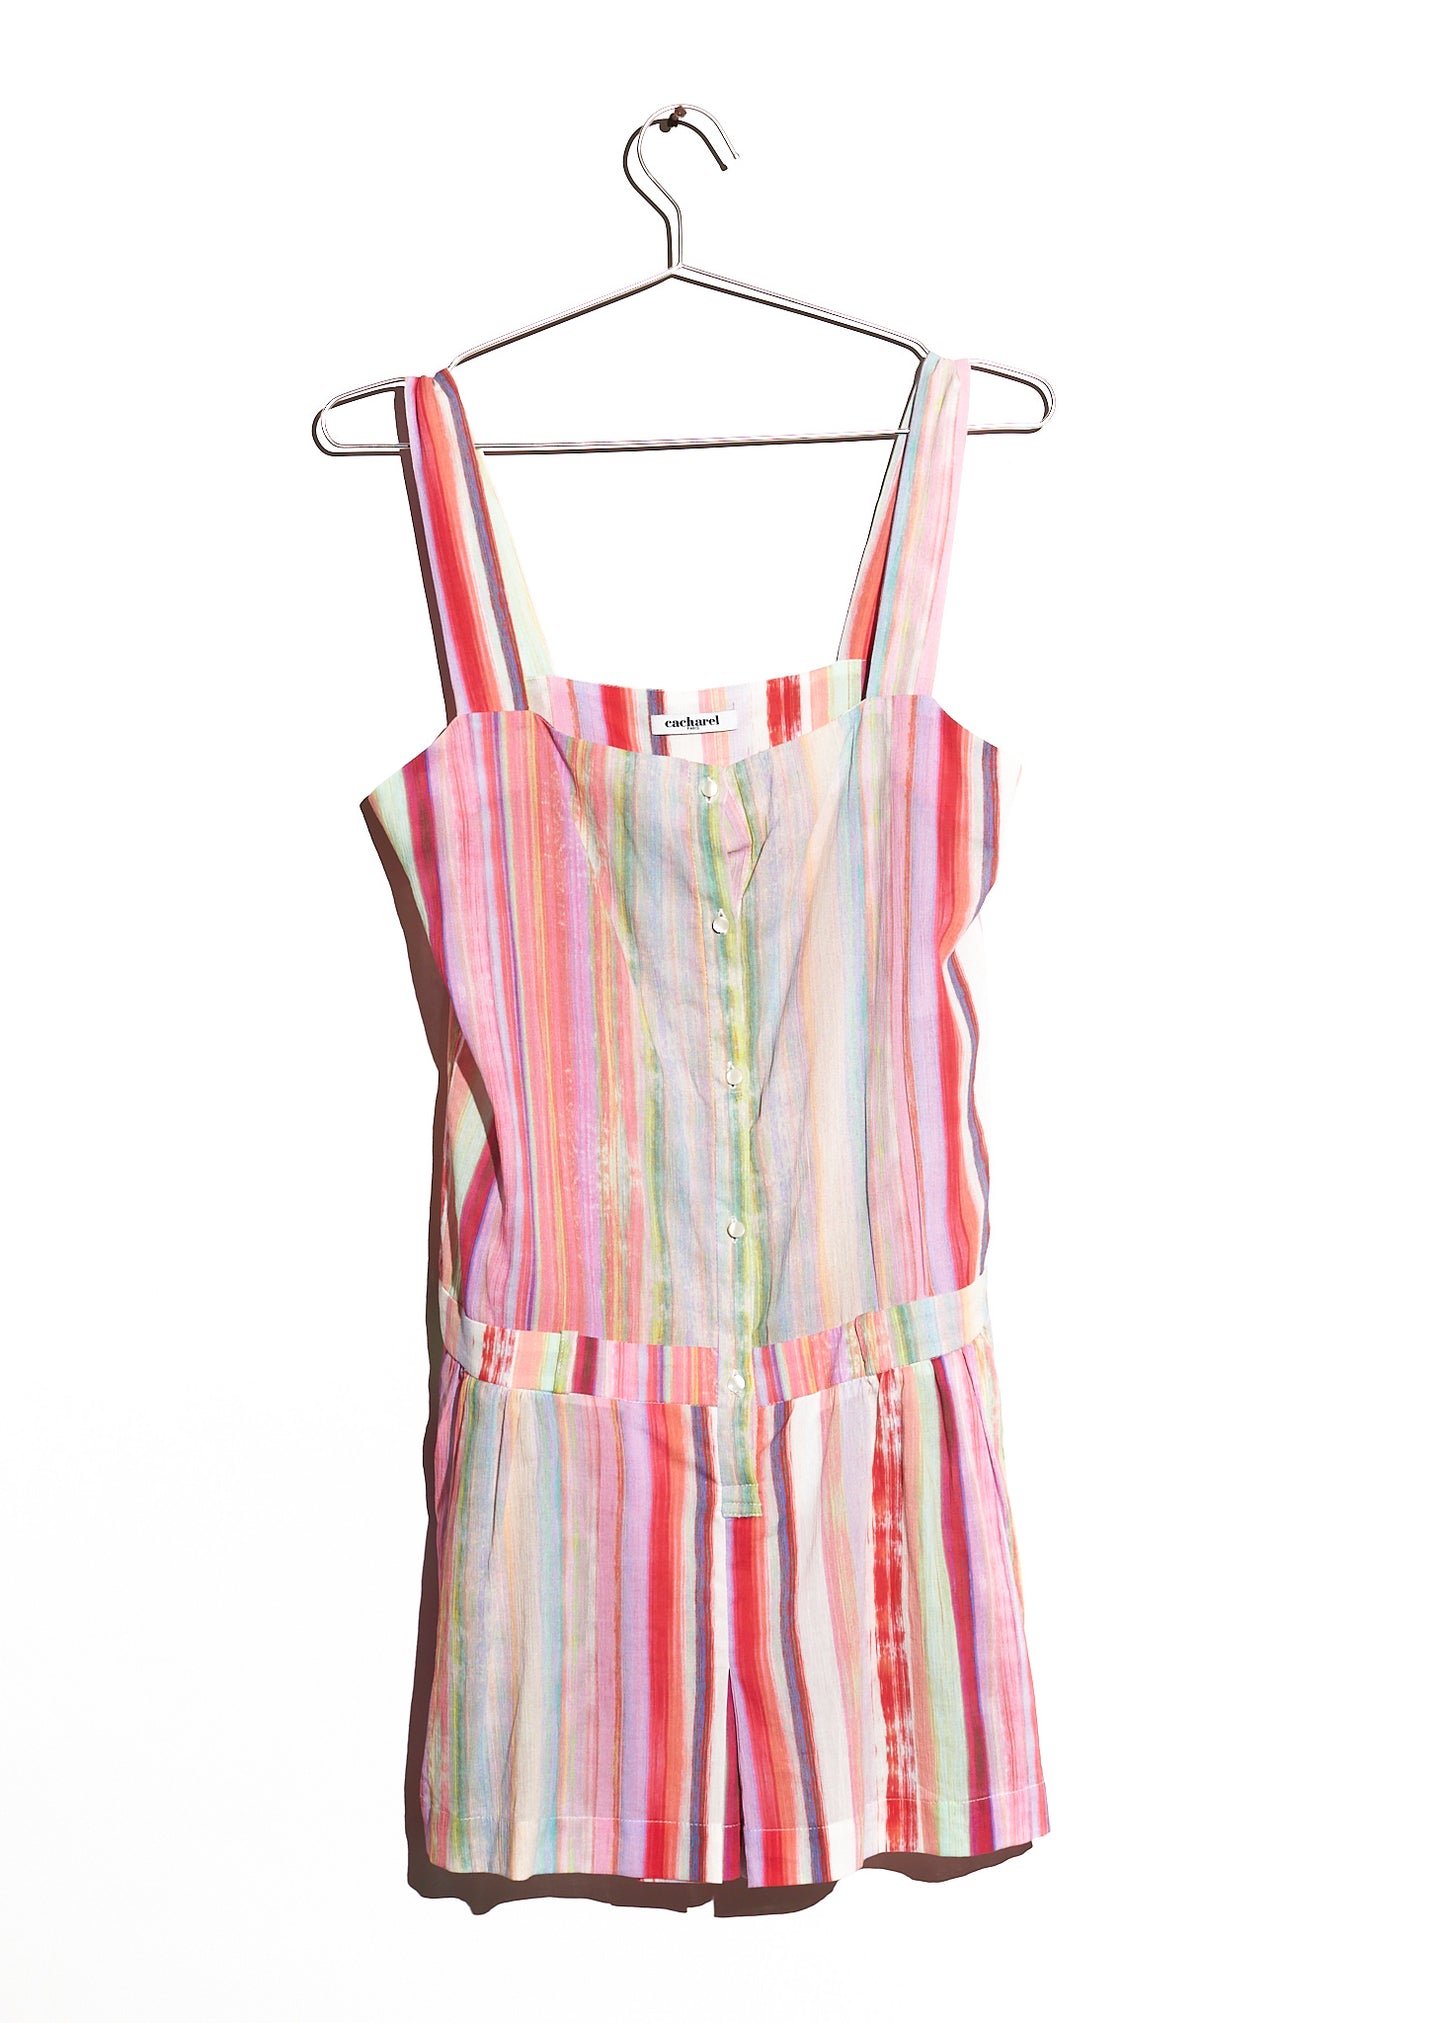 Cacharel Multi-Colored Playsuit